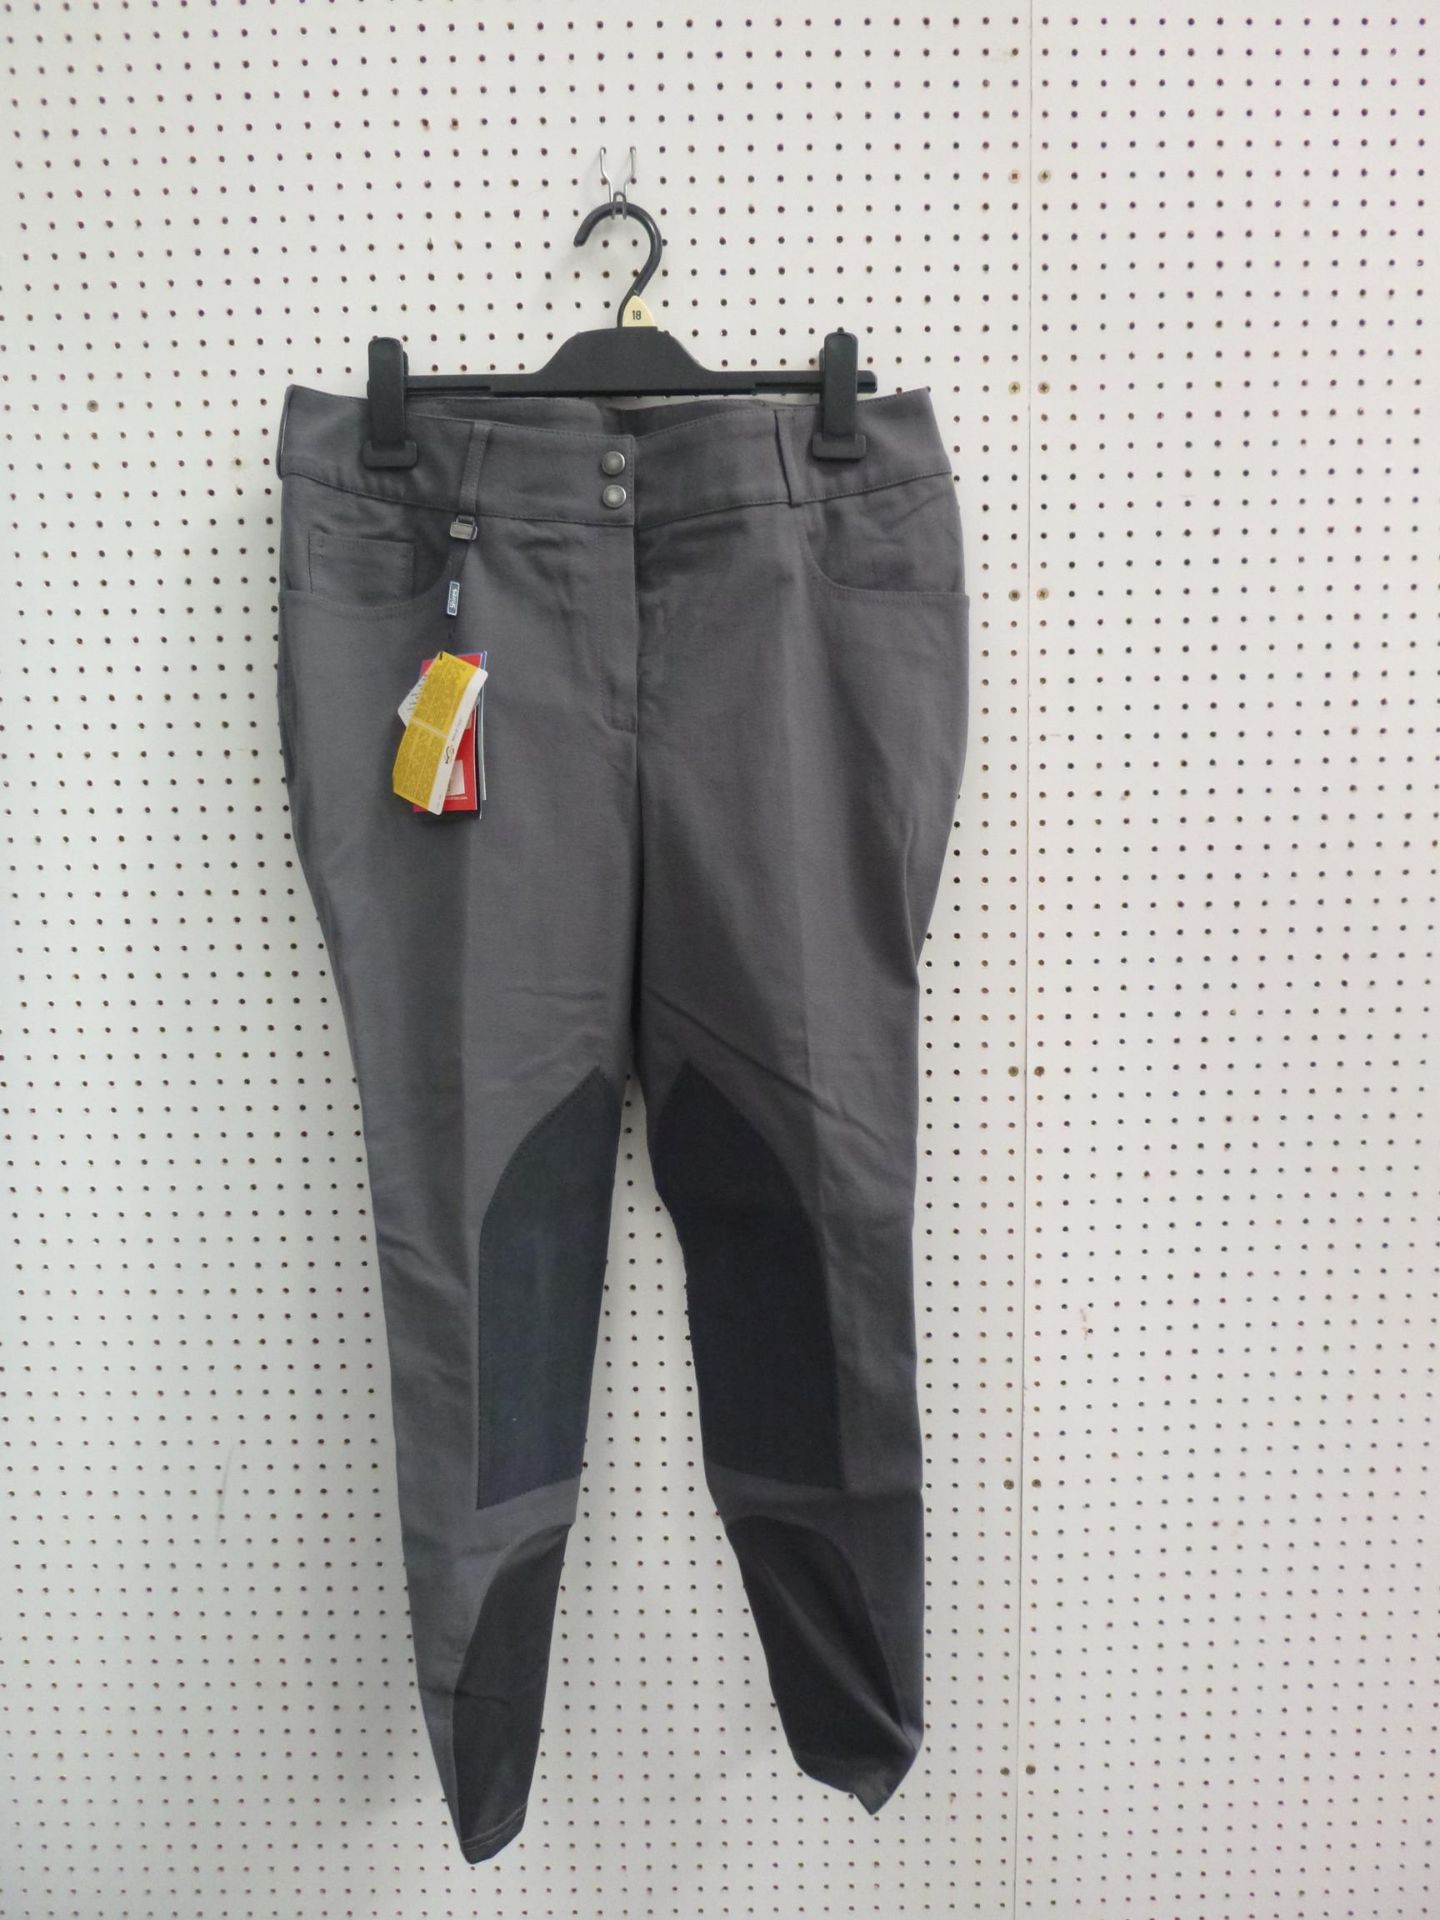 * Two Pairs of New Shires Ladies Winchester Breeches in Grey size 34 (2) RRP £119.98